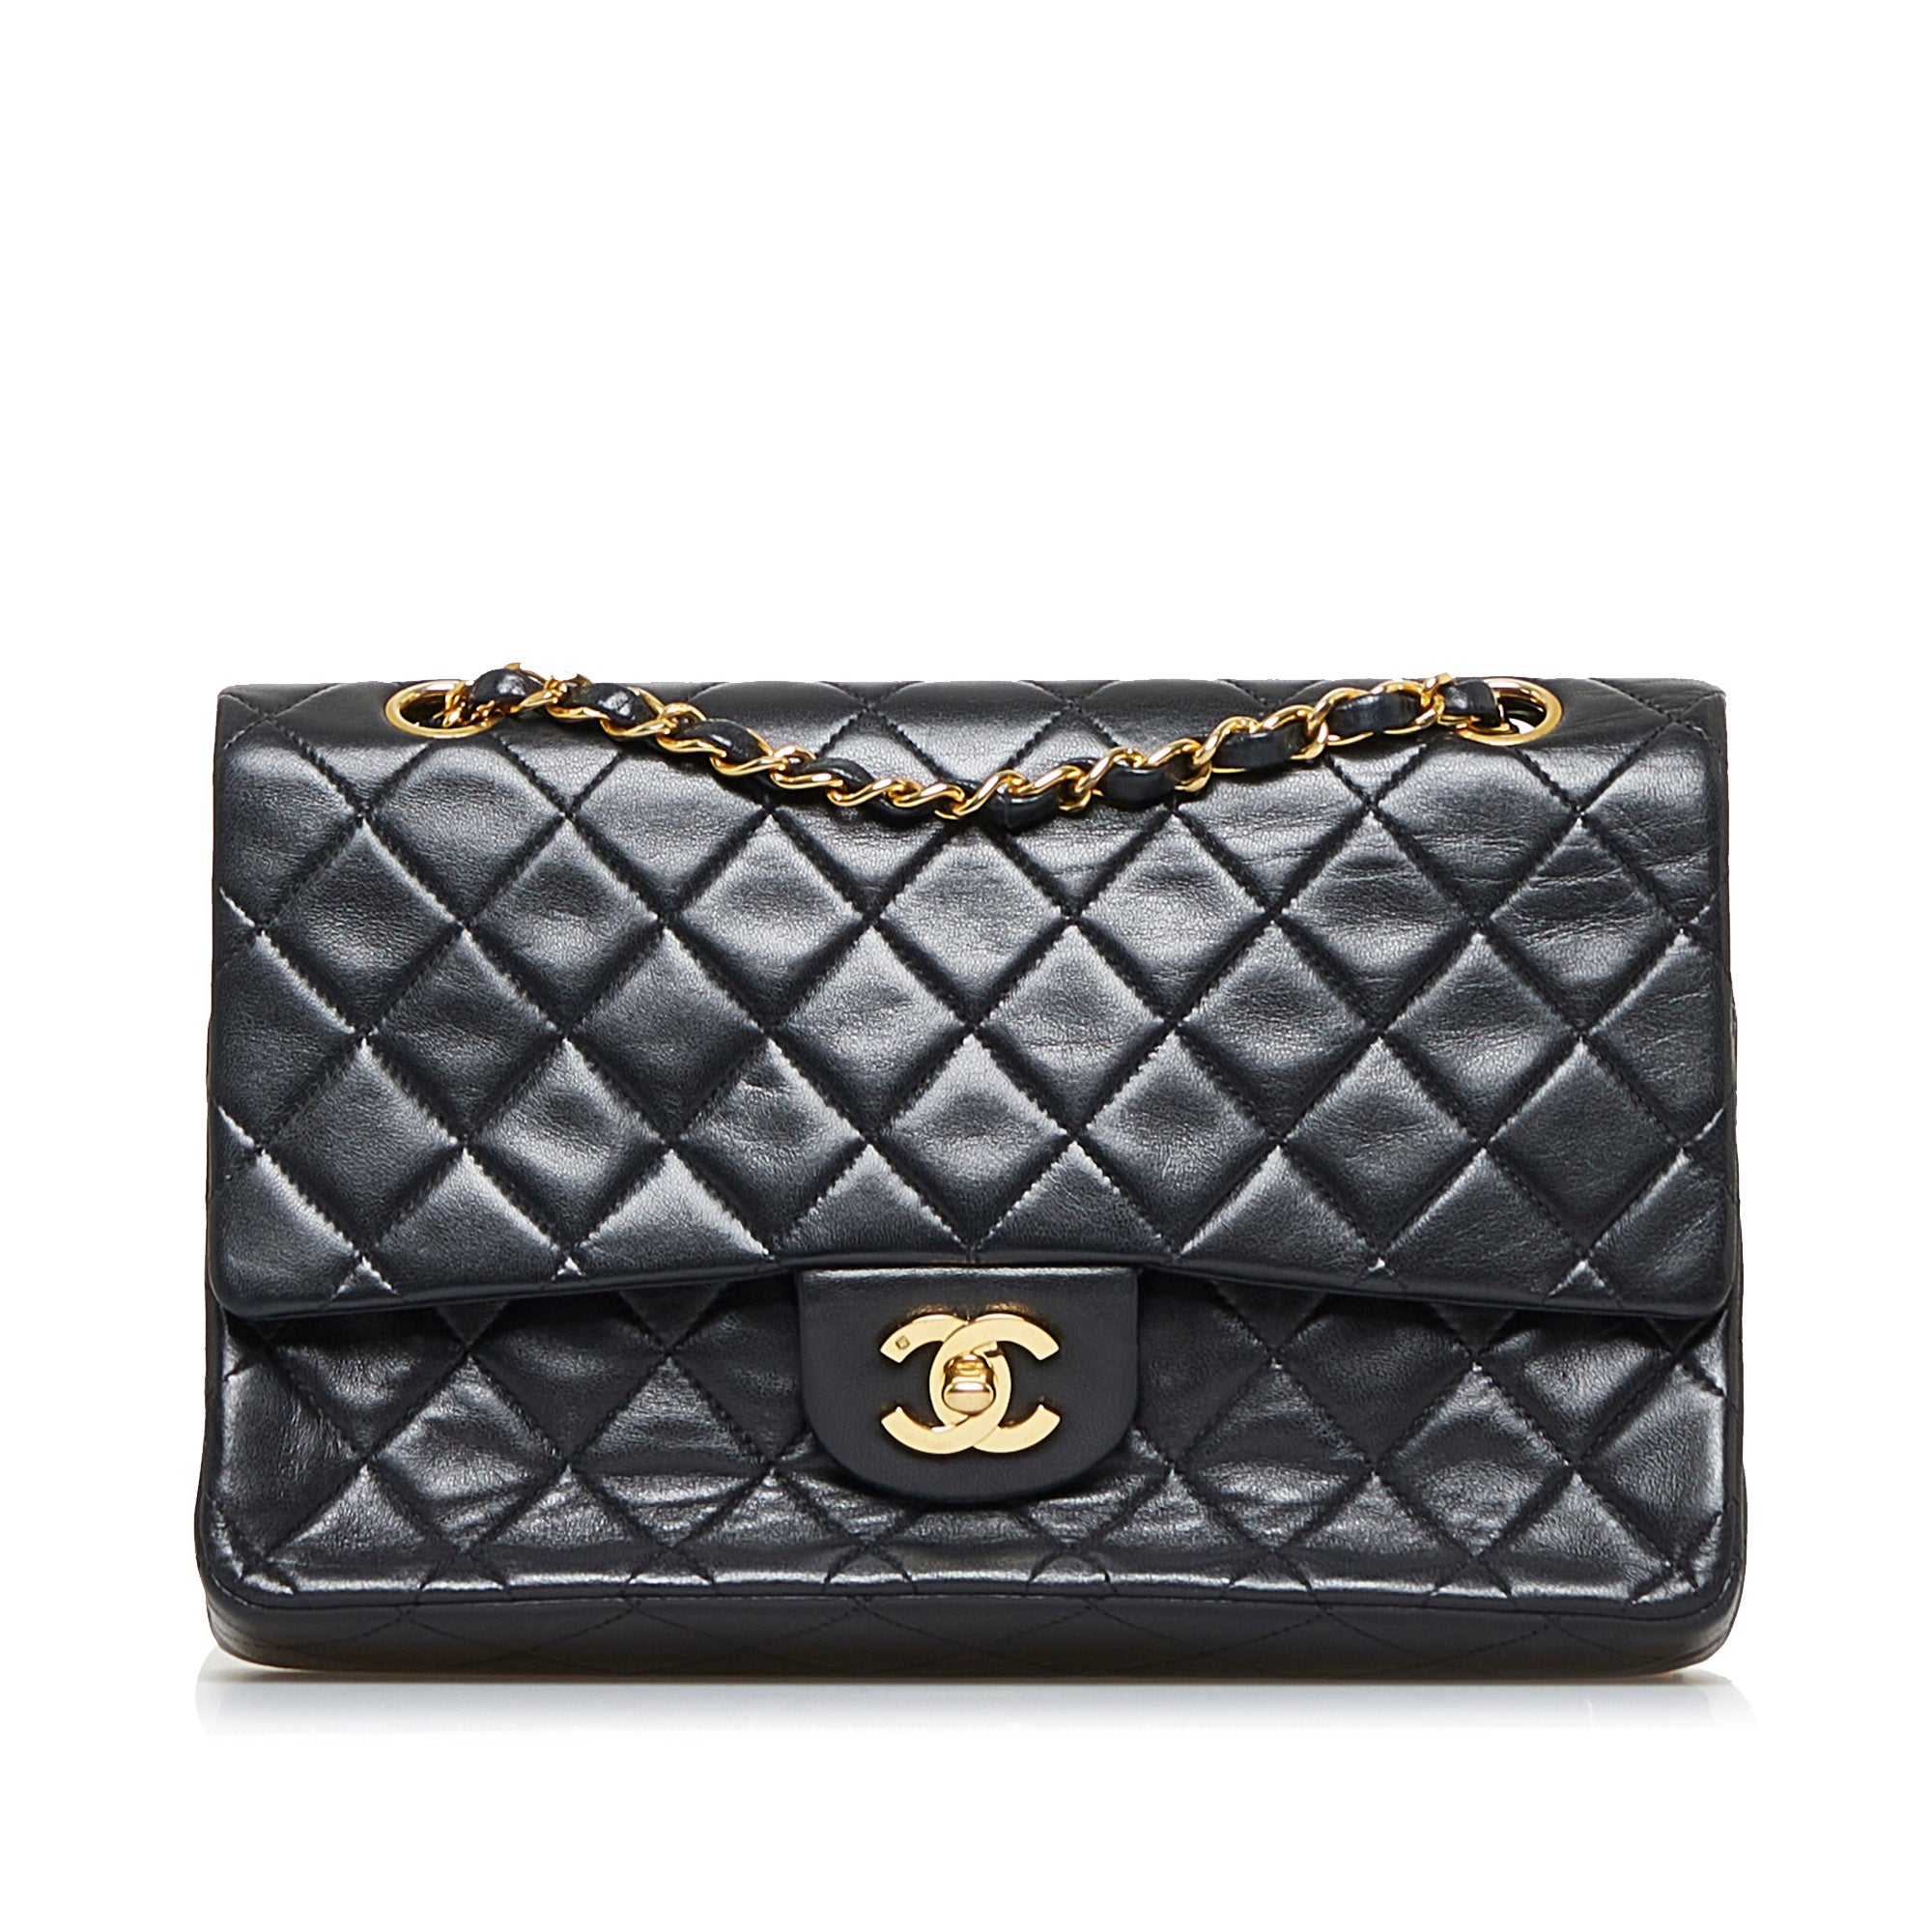 CHANEL Double Flap Black Quilted Lambskin Leather Medium Shoulder